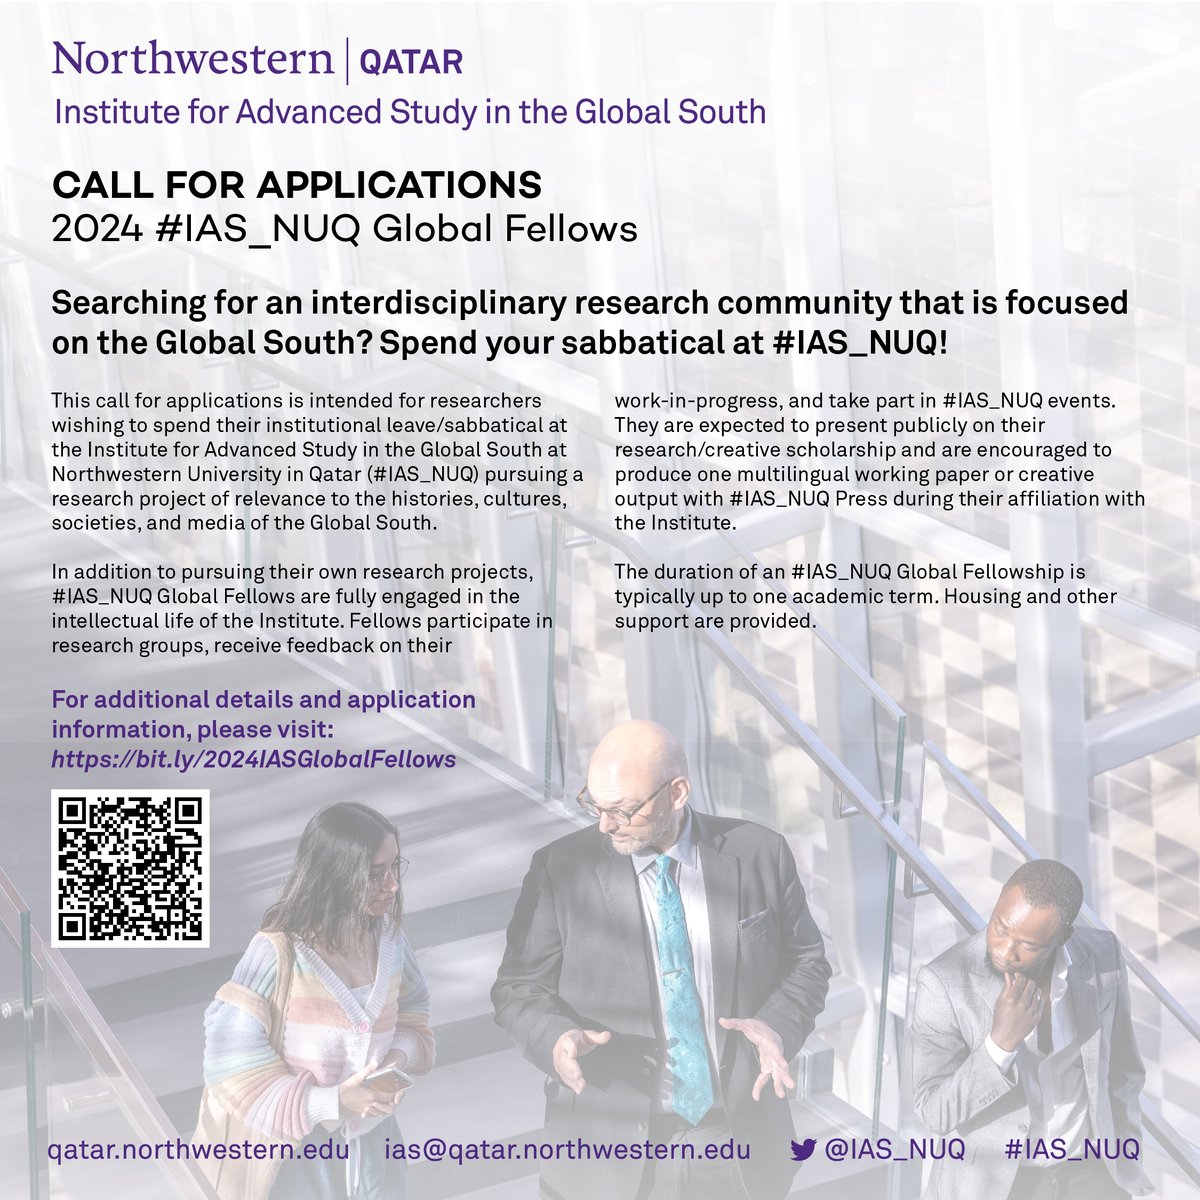 CALL FOR APPLICATIONS: 2024 #IAS_NUQ GLOBAL FELLOWS Searching for an interdisciplinary research community that is focused on the Global South? Spend your sabbatical at #IAS_NUQ! Housing and other support provided. Deadline: July 15, 2023. View details: bit.ly/2024IASGlobalF…